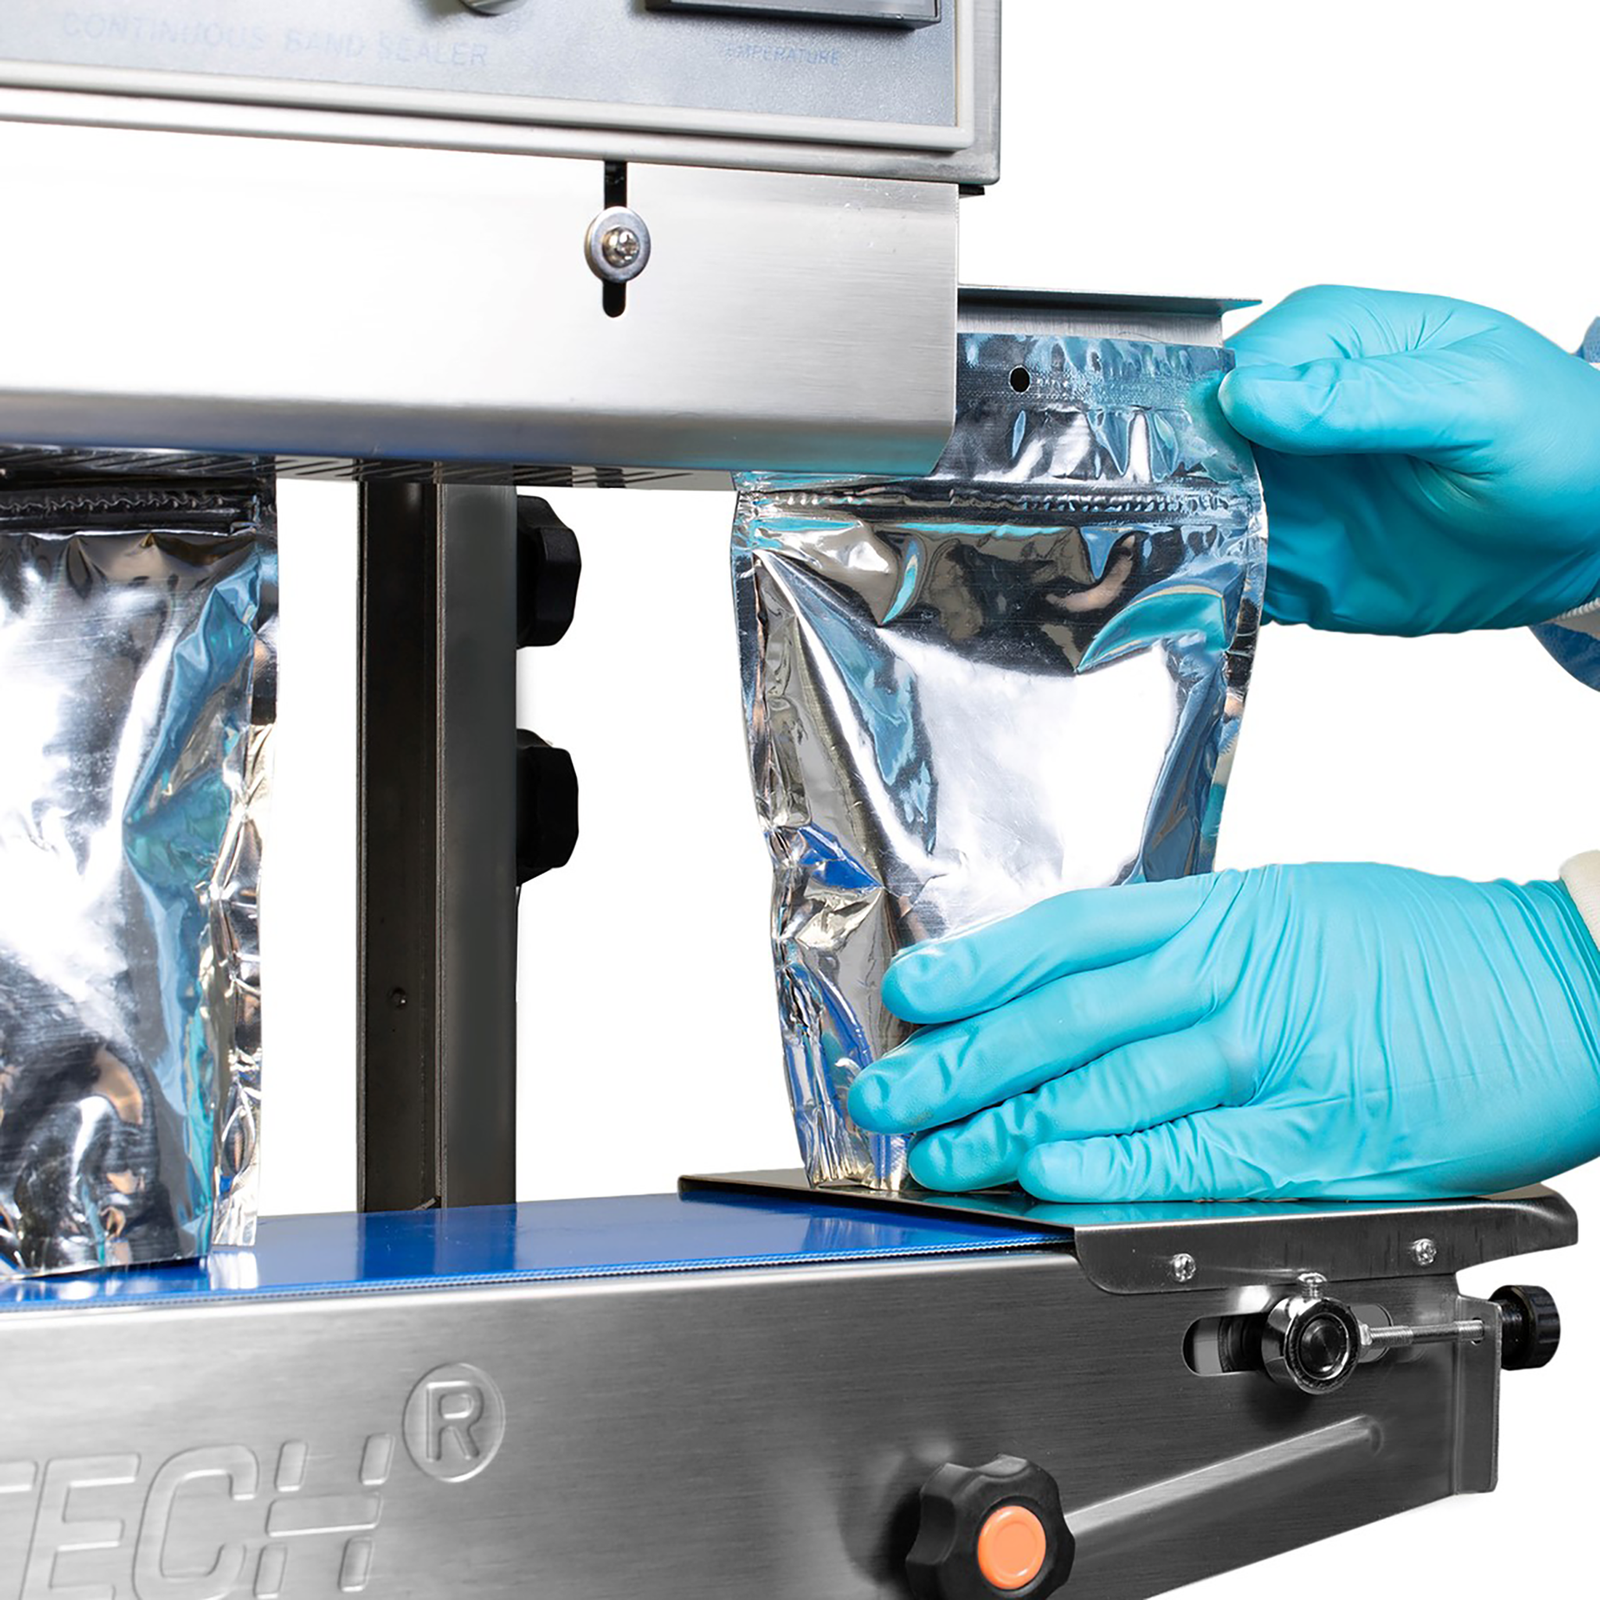 A person wearing protective clothing while inserting a silver plastic bag into the JORESTECH continuos band sealer. There are several bags on the blue revolving band being sealed.